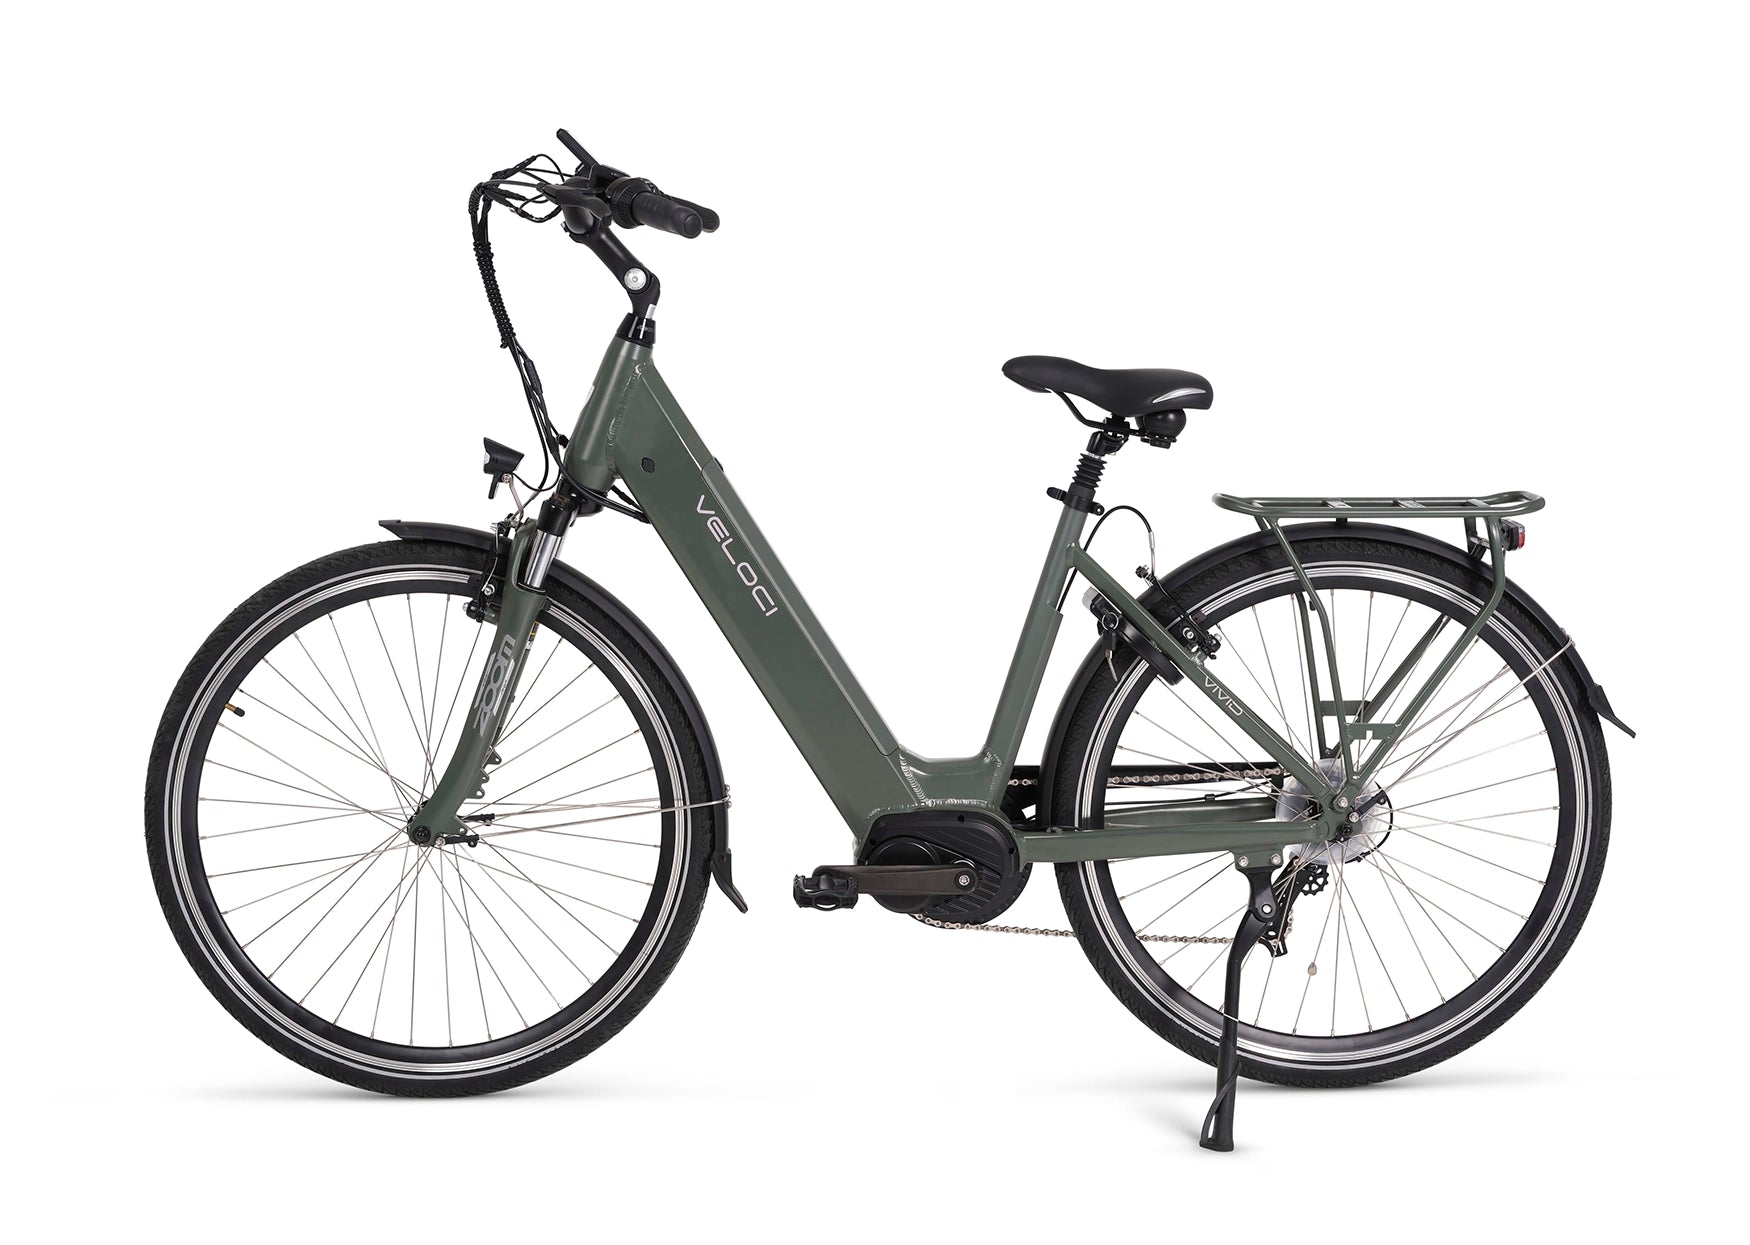 A photo of the left hand side of a Veloci Vivid electric bike against a crisp white studio background. The frame of the bike is a grey/green colour. The thick downtube denotes the integrated battery. The ebike has front fork suspension and a kick stand can also be seen. The Veloci Vivid is available for sale from Bleeper, with test rides facilitated at Bleeper's workshop on Merchants Quay in Dublin city centre. 